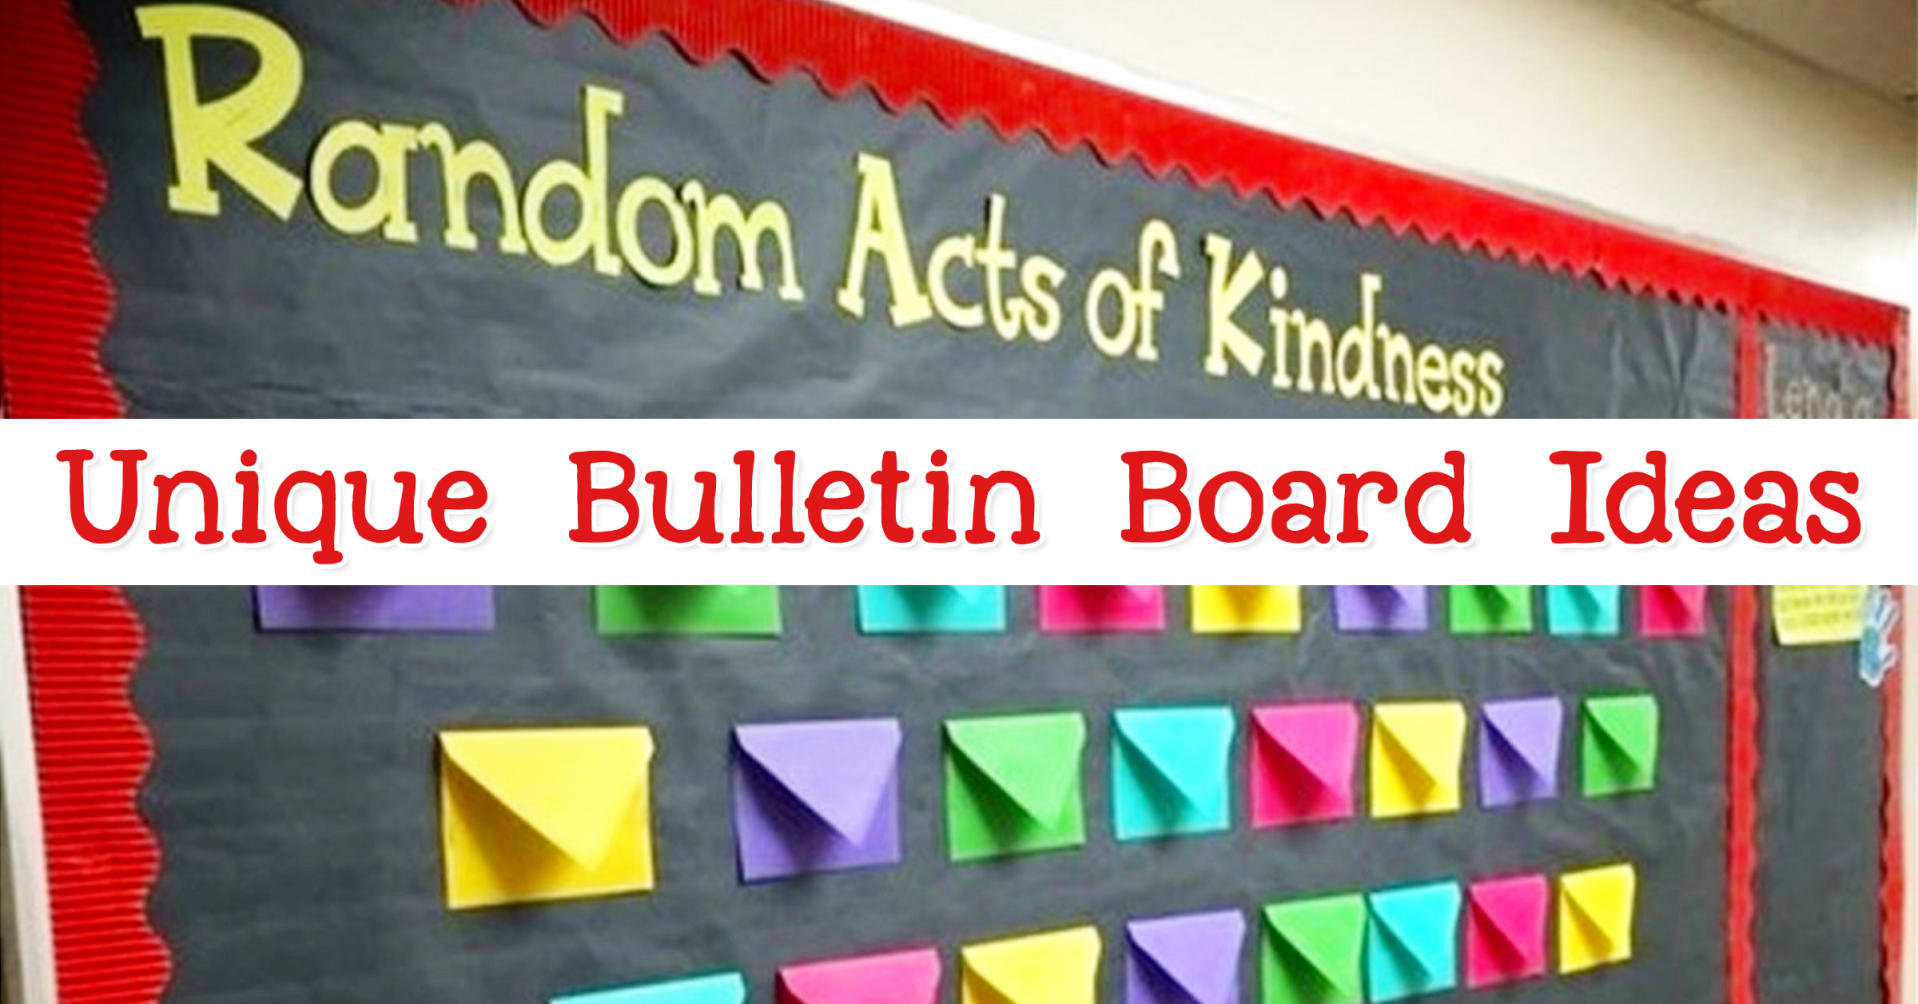 Decorative bulletin boards and bulletin board ideas - bulletin board materials and school bulletin board supplies and ideas for teachers in the classroom. Fun and easy DIY bulletin board ideas for January, for back to school and ideas for fall, spring and Holiday bulletin boards